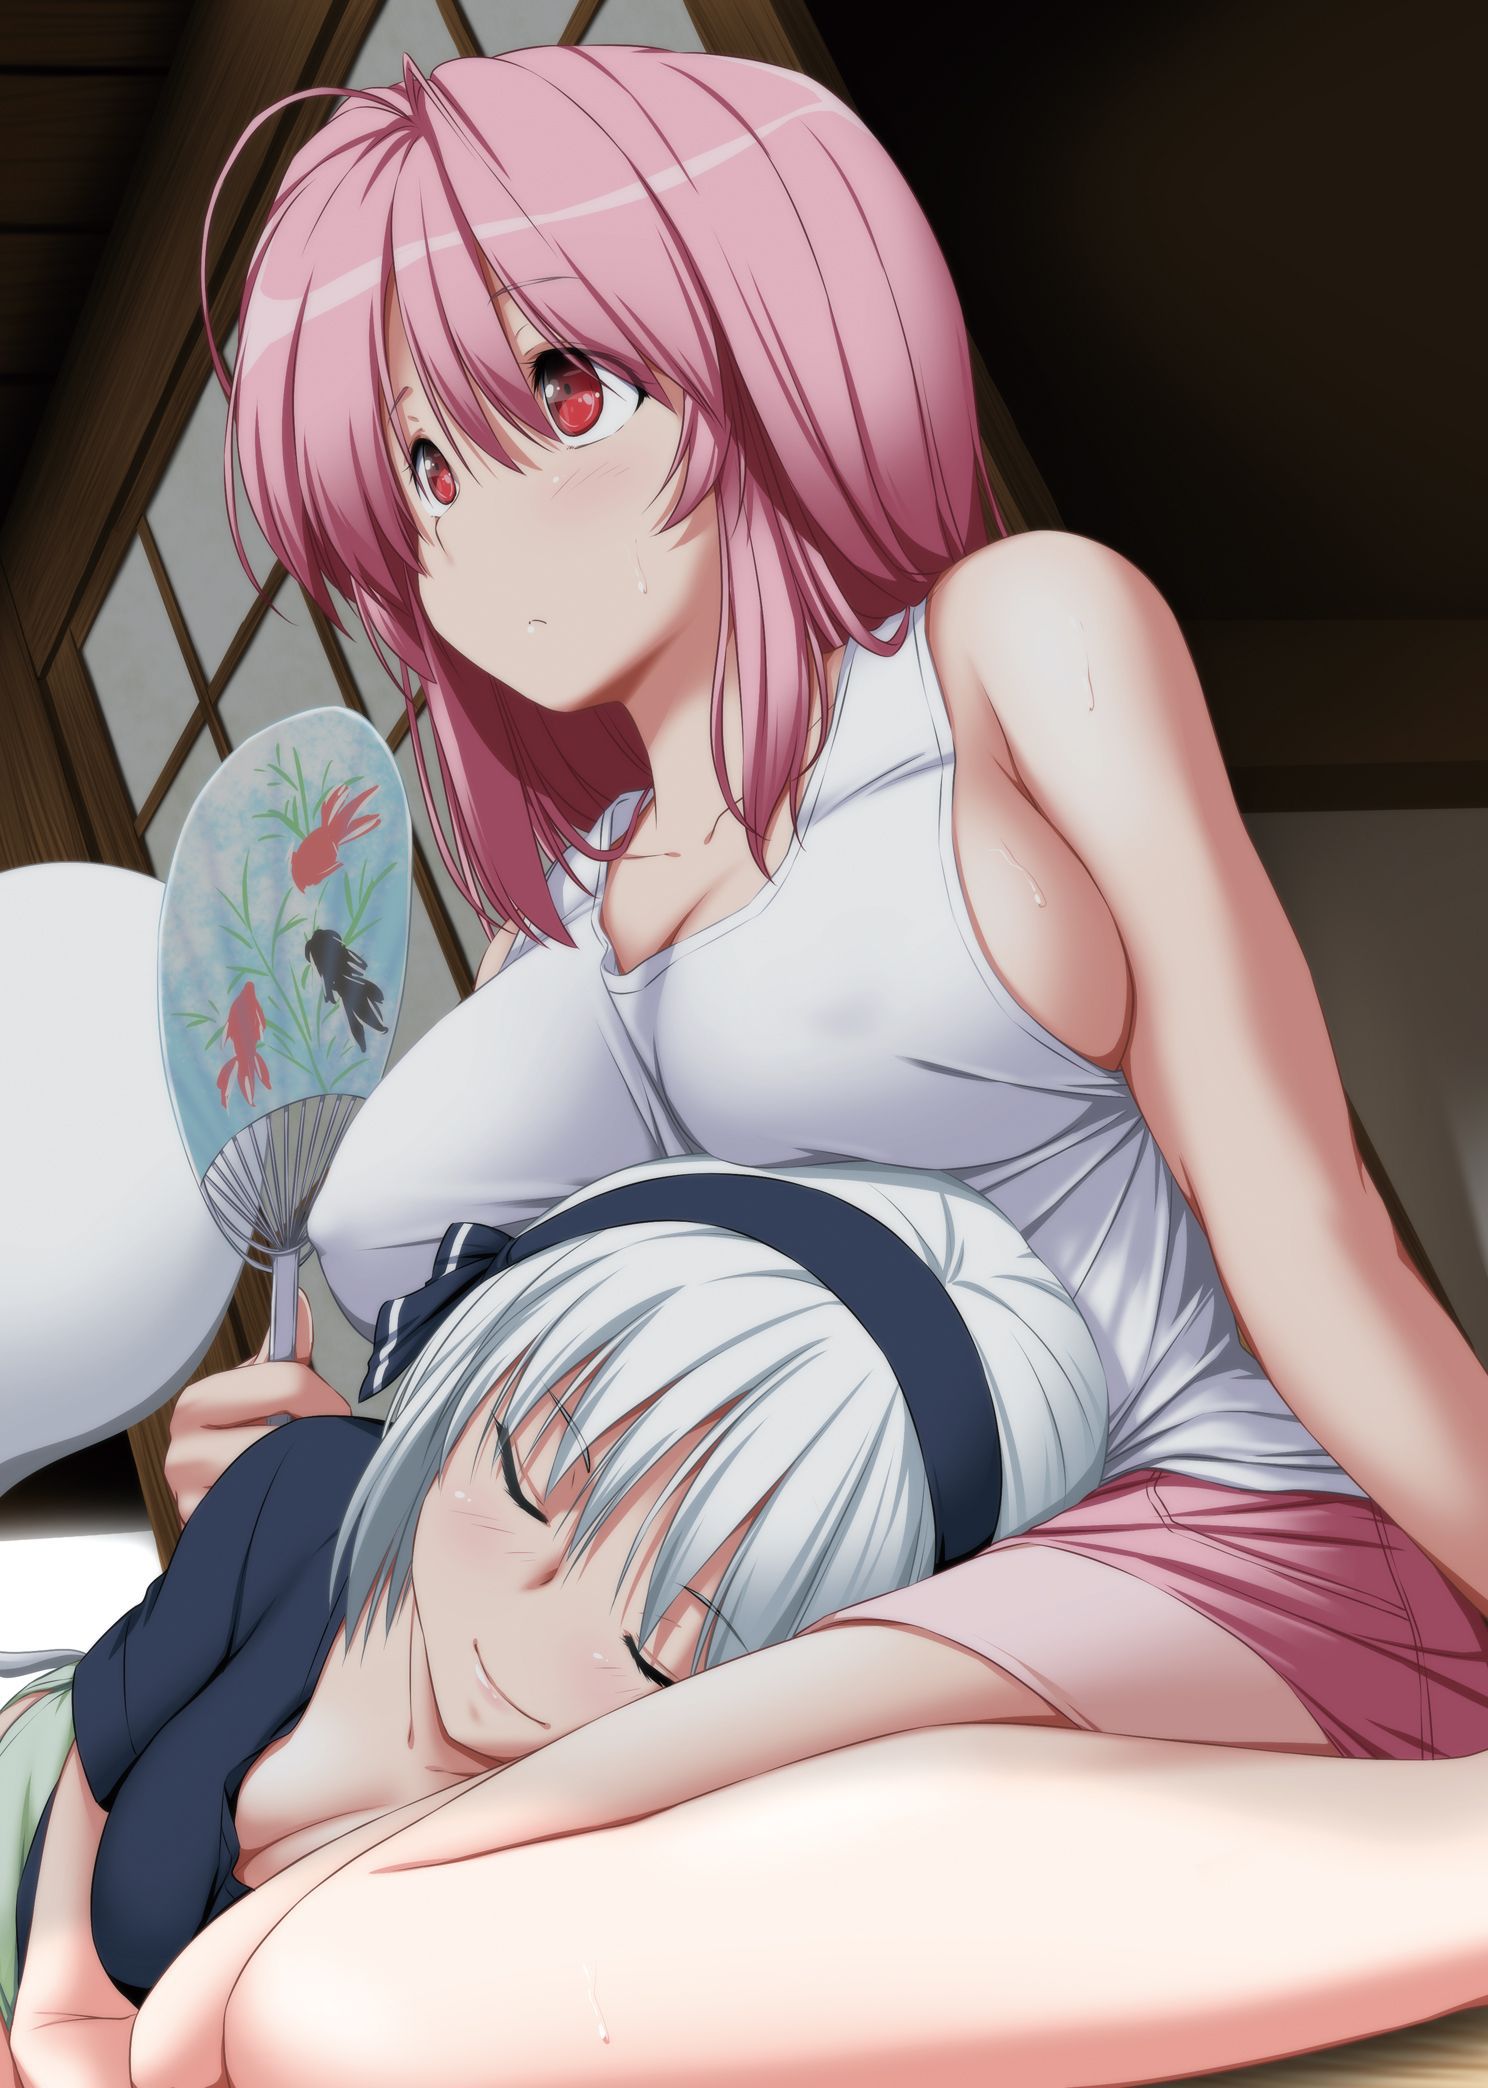 [secondary/ZIP] lovely yuri Lesbian image of a cute girl each other 21